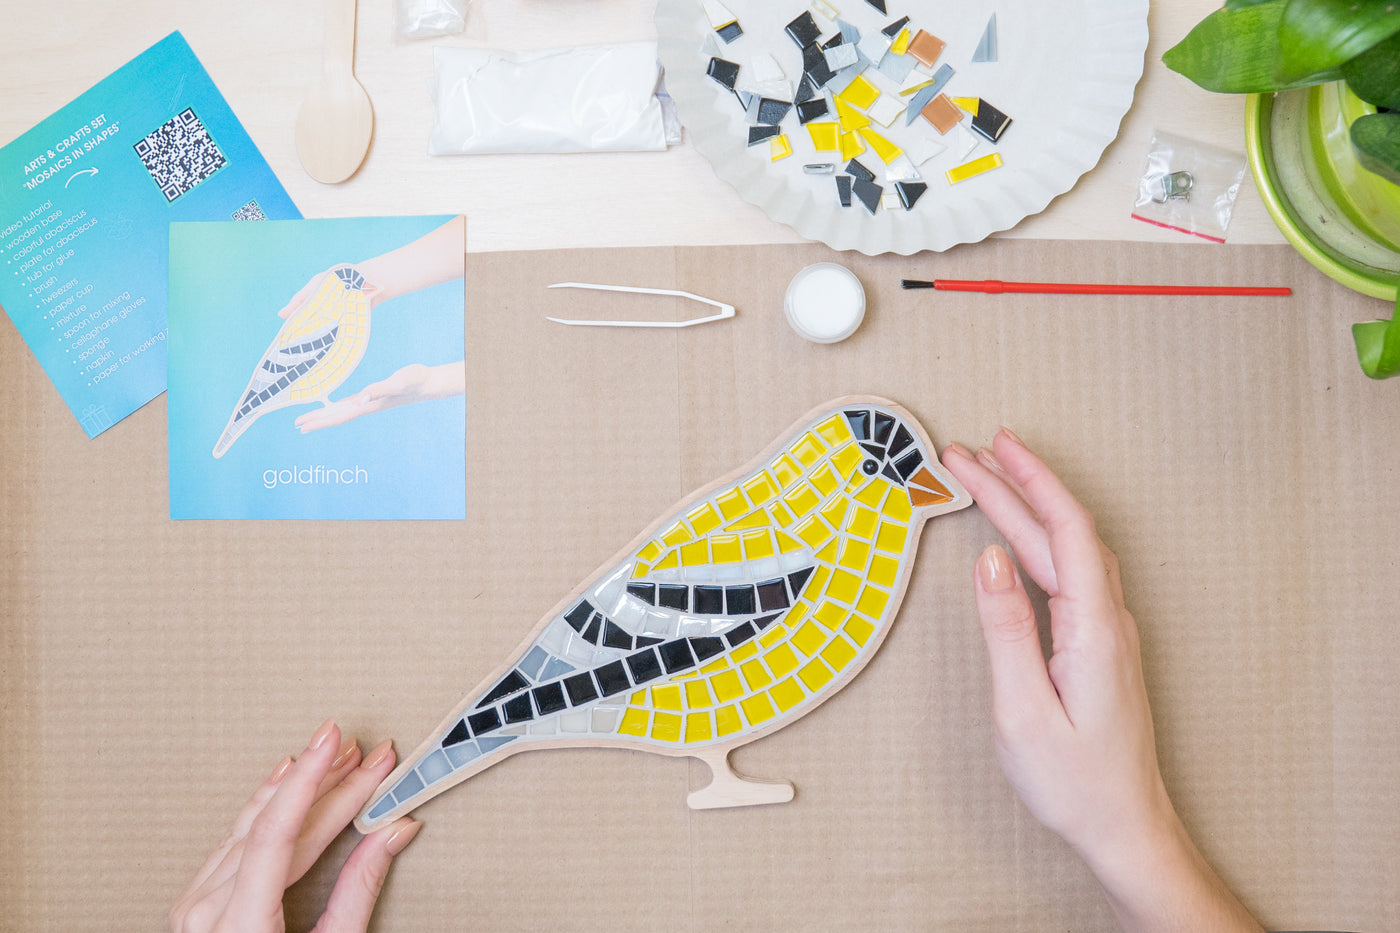 The process of creating goldfinch glass mosaic